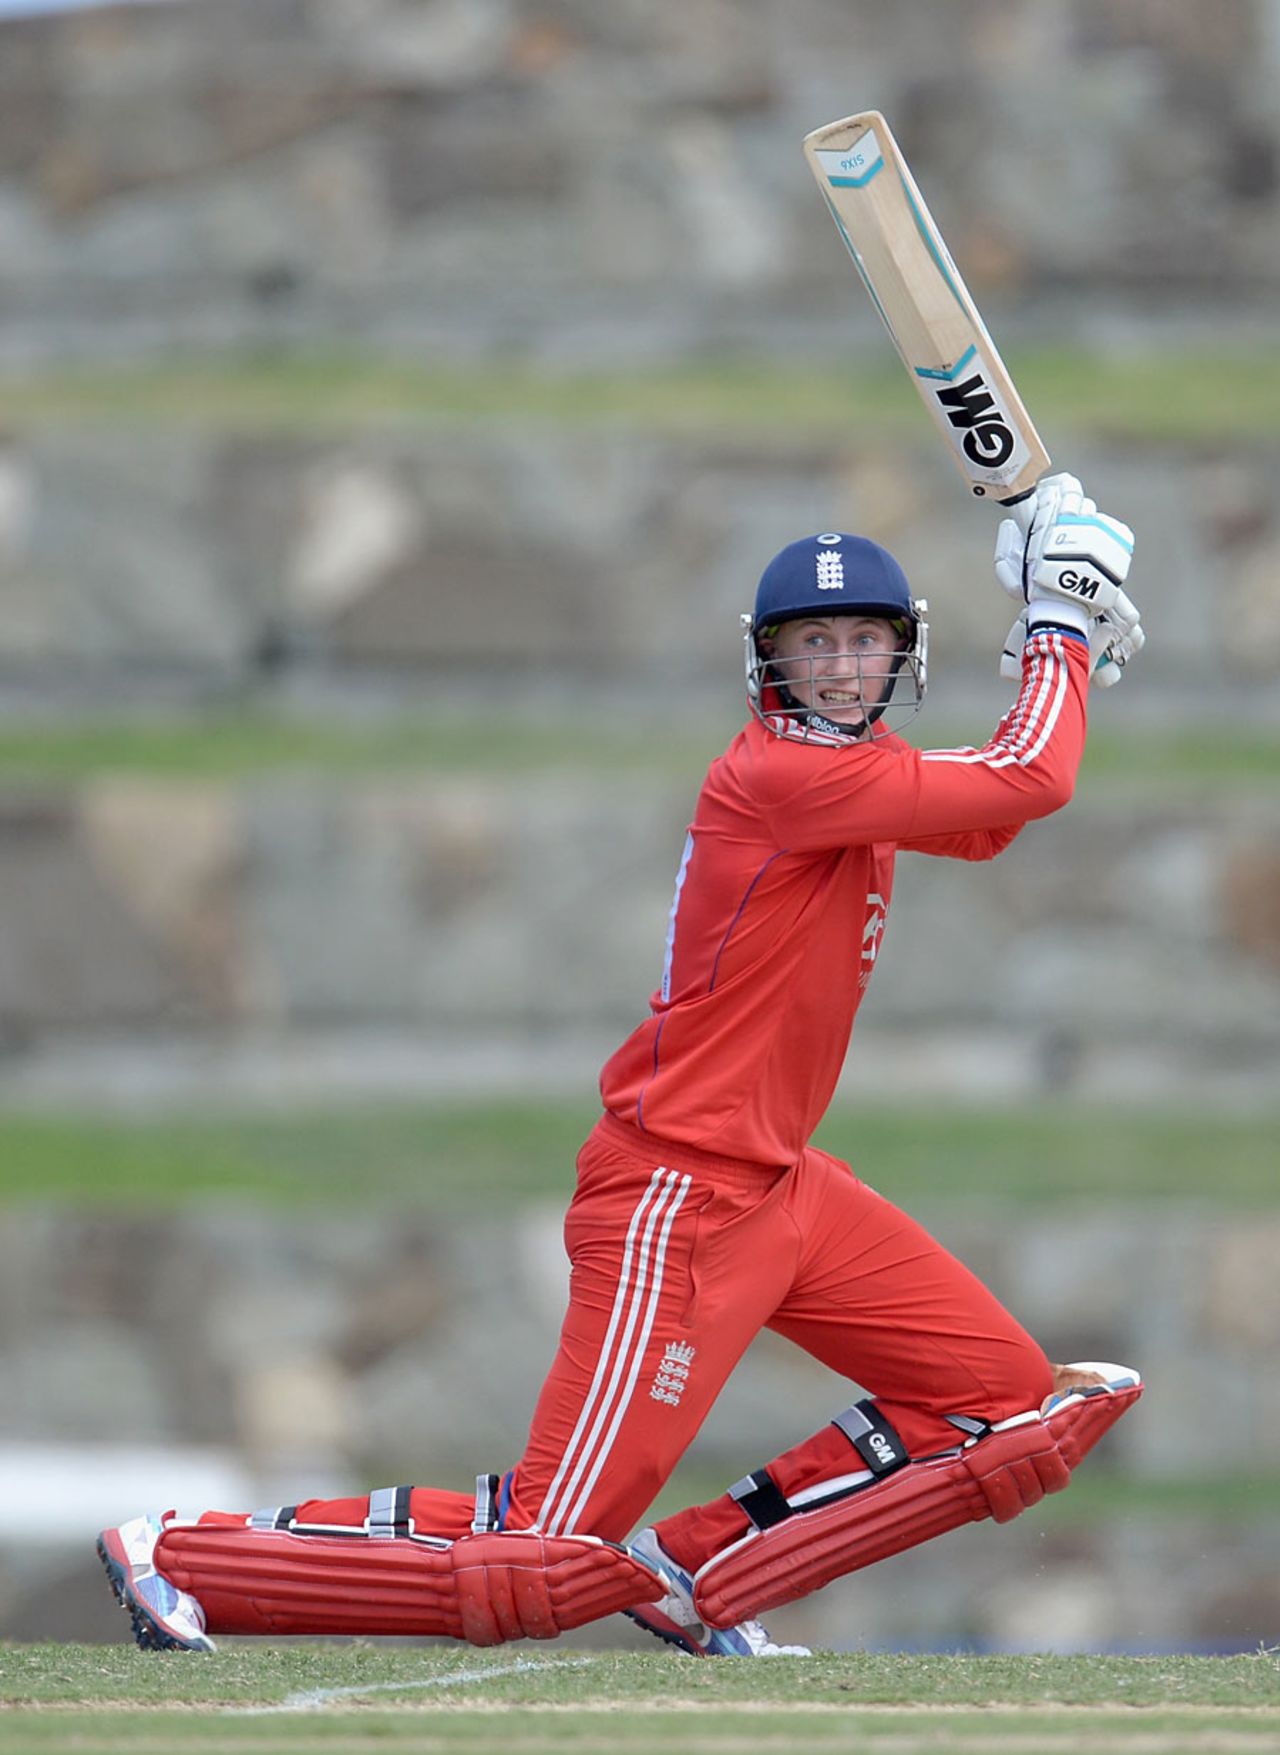 Joe Root held England together with an unbeaten hundred, UWI Vice Chancellor's XI v England XI, Tour match, North Sound, February 25, 2014